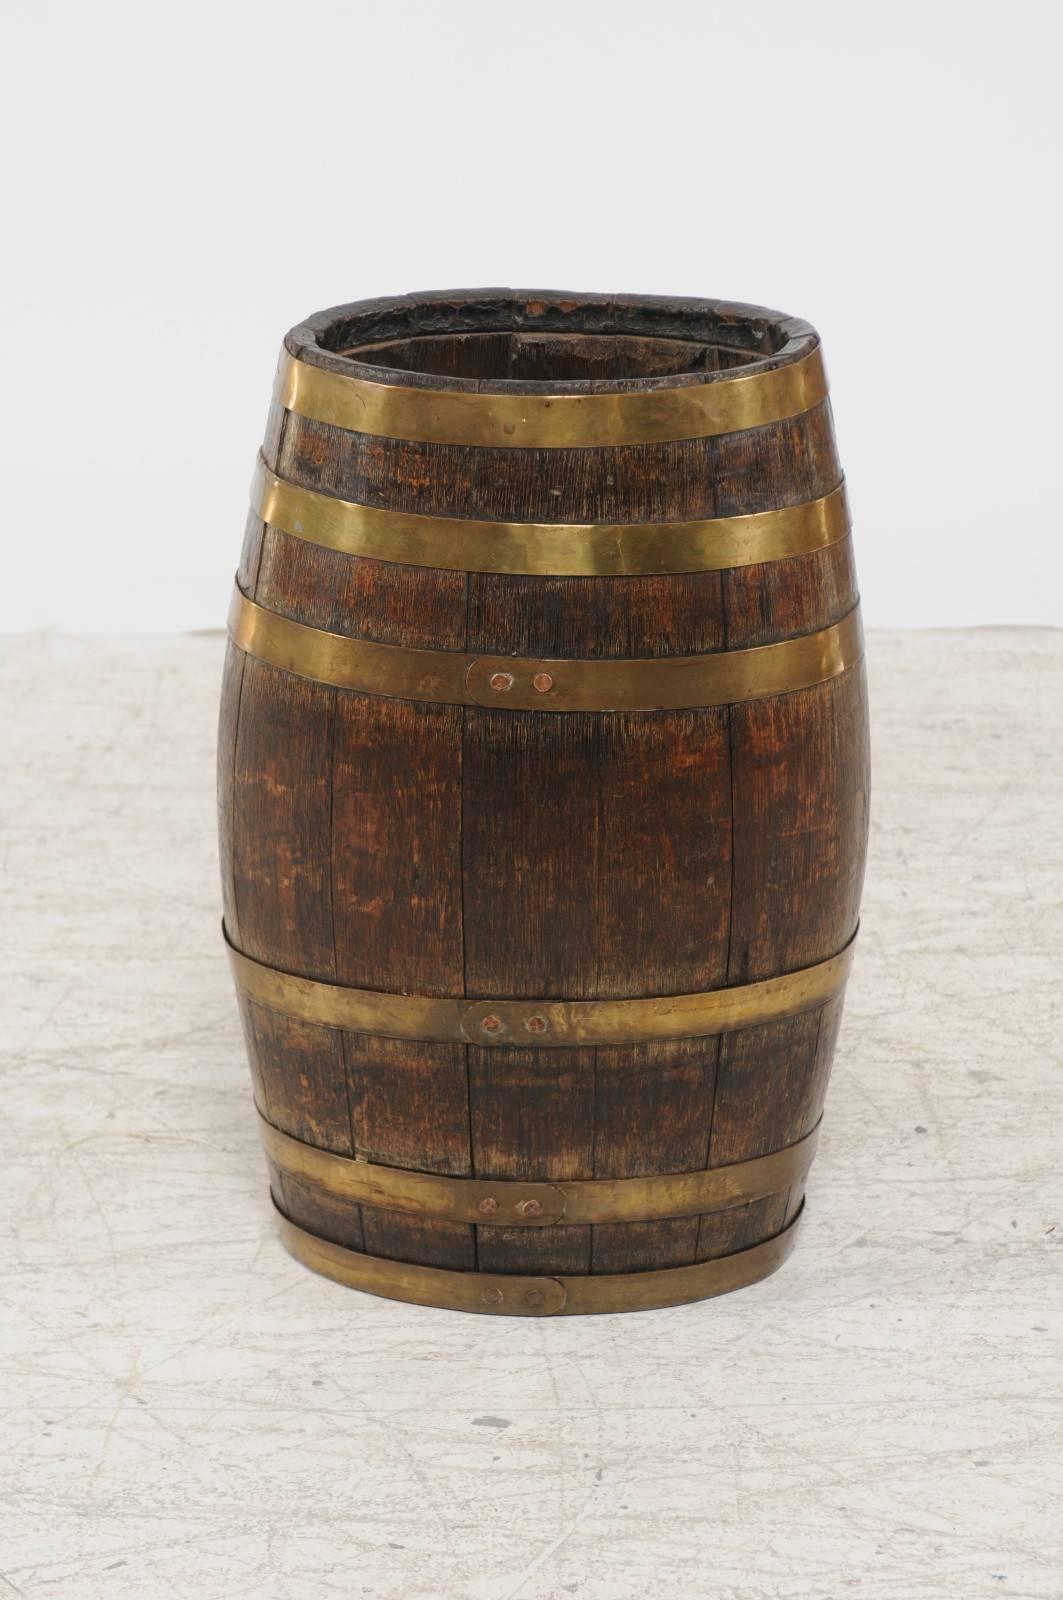 A tall English oak barrel with brass straps from the late 19th century. This English barrel features a sturdy oak body made of various slats, whose vertical lines are contrasted by the horizontal brass straps that accentuate the piece. The